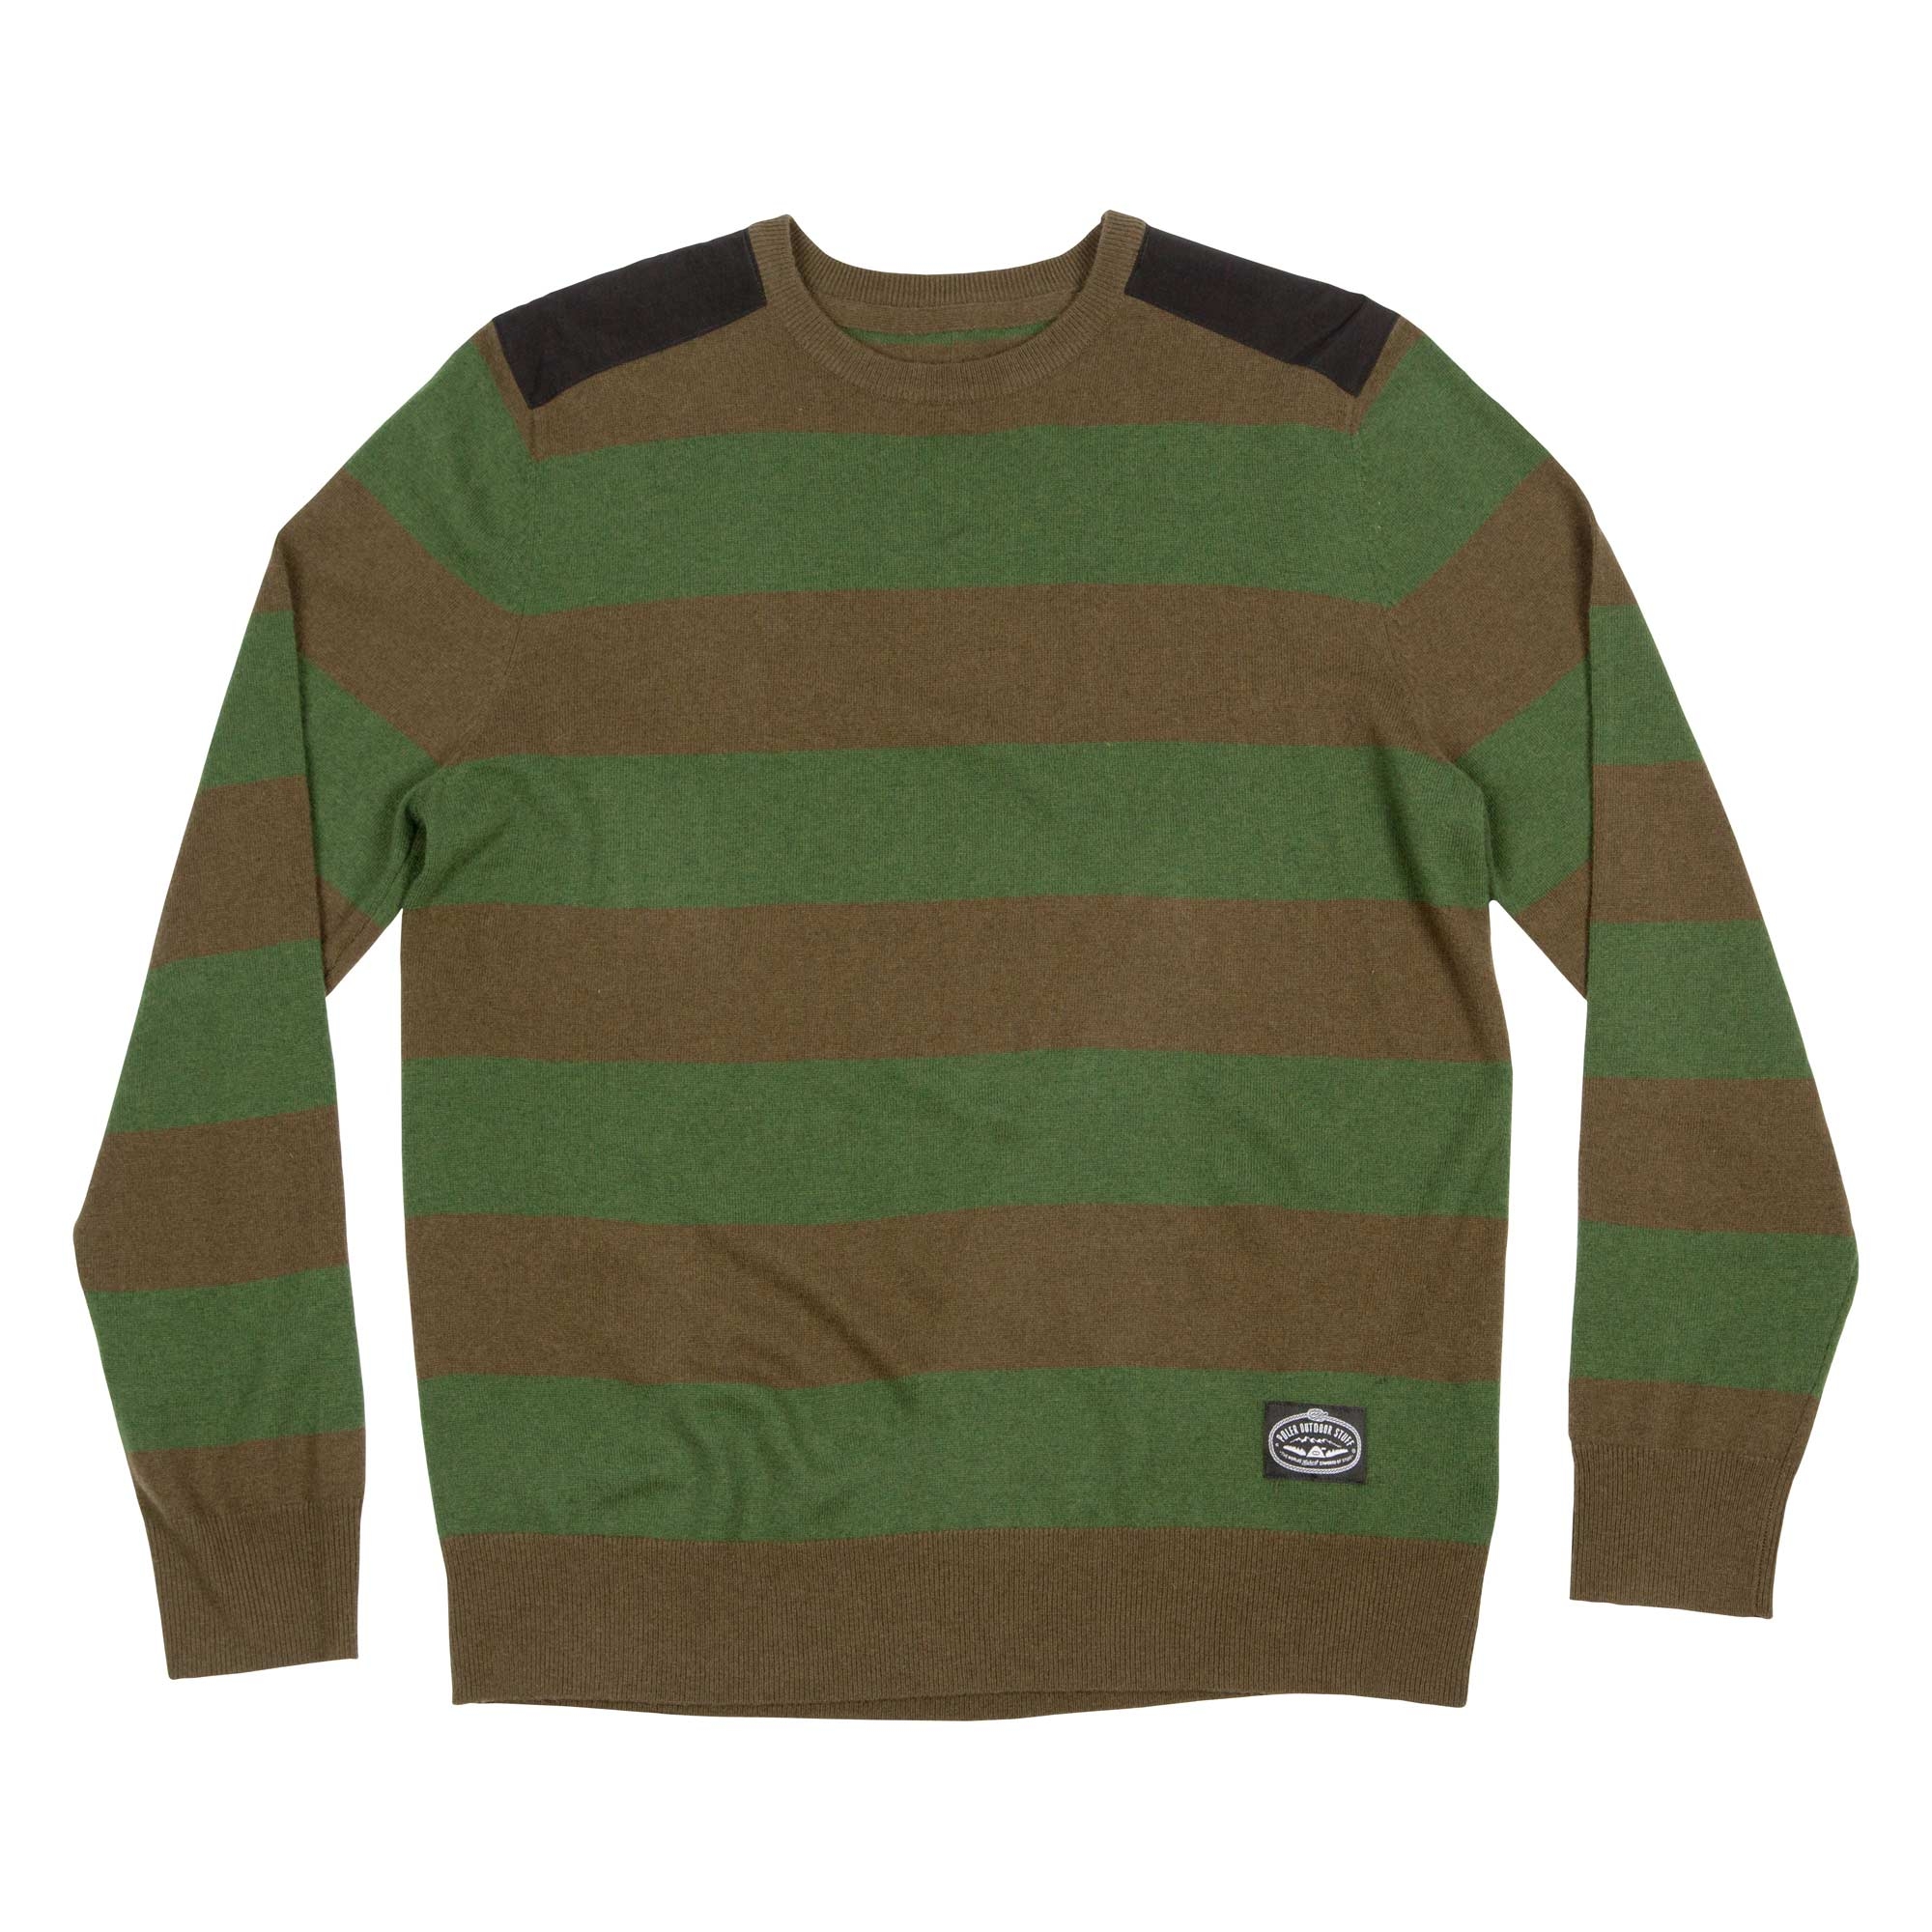 POLER Knit Pullover DOUBLE DOUBLE Crew, olive